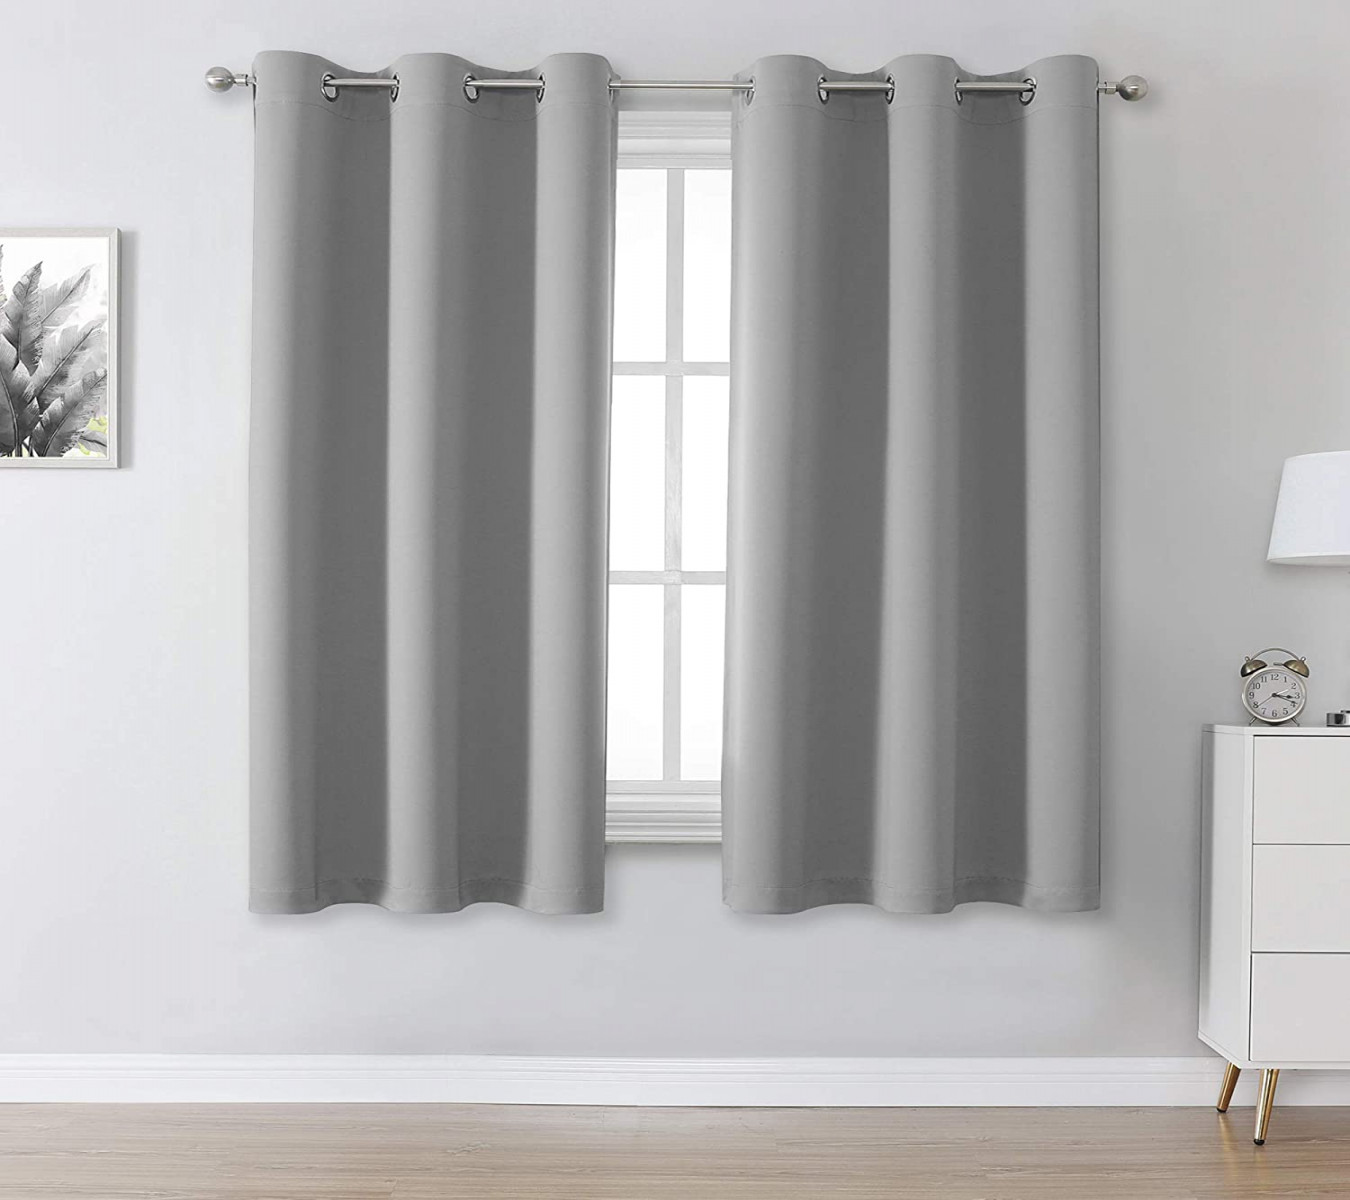 DUALIFE Light Grey Blackout Curtains Short Eyelet Curtains " x " Length   Pack Thermal Insulated Solid Energy Efficient Room Darkening Bedroom